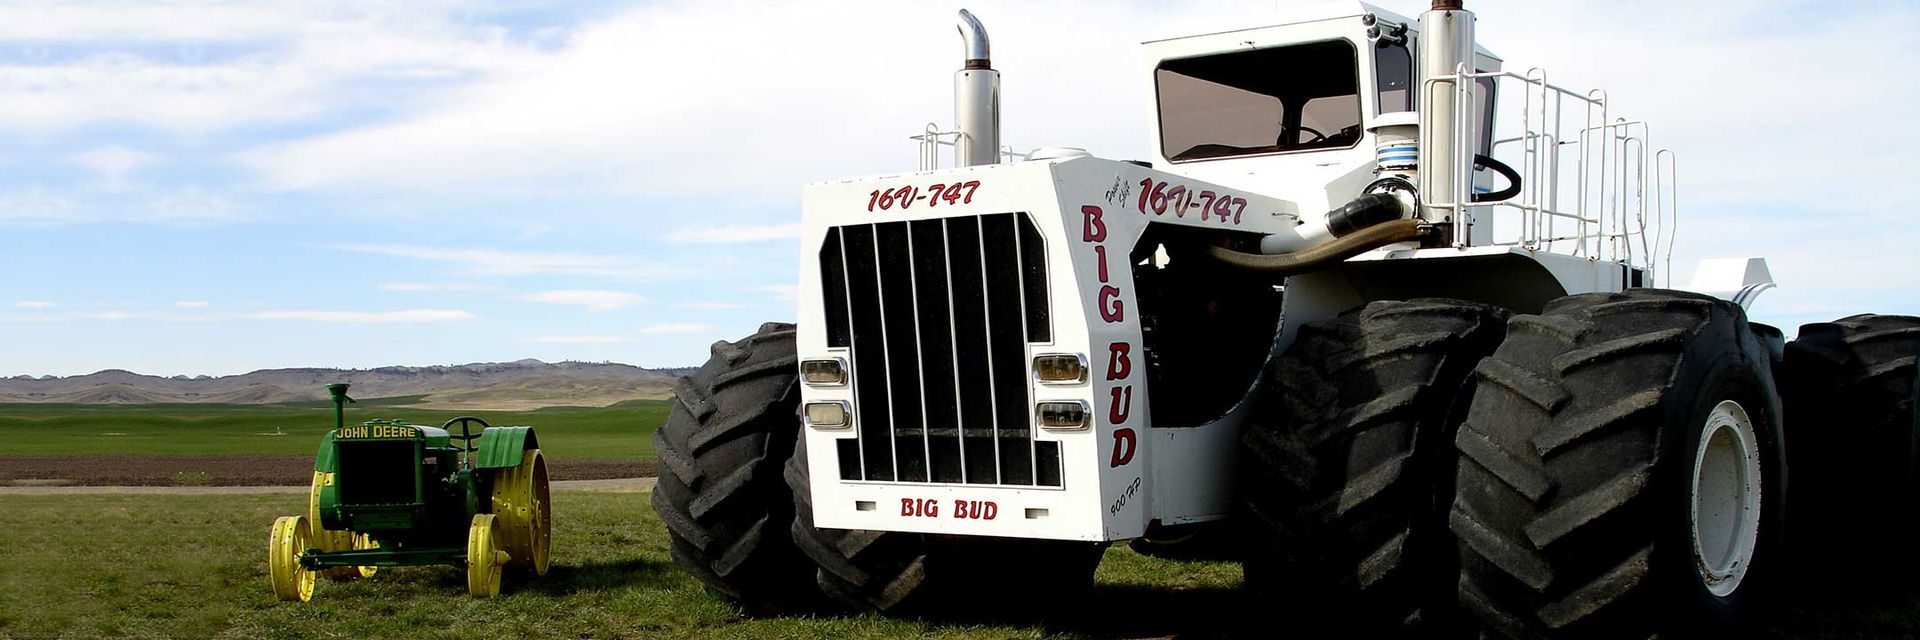 World's Largest Farm Tractor, world record in Havre, Montana